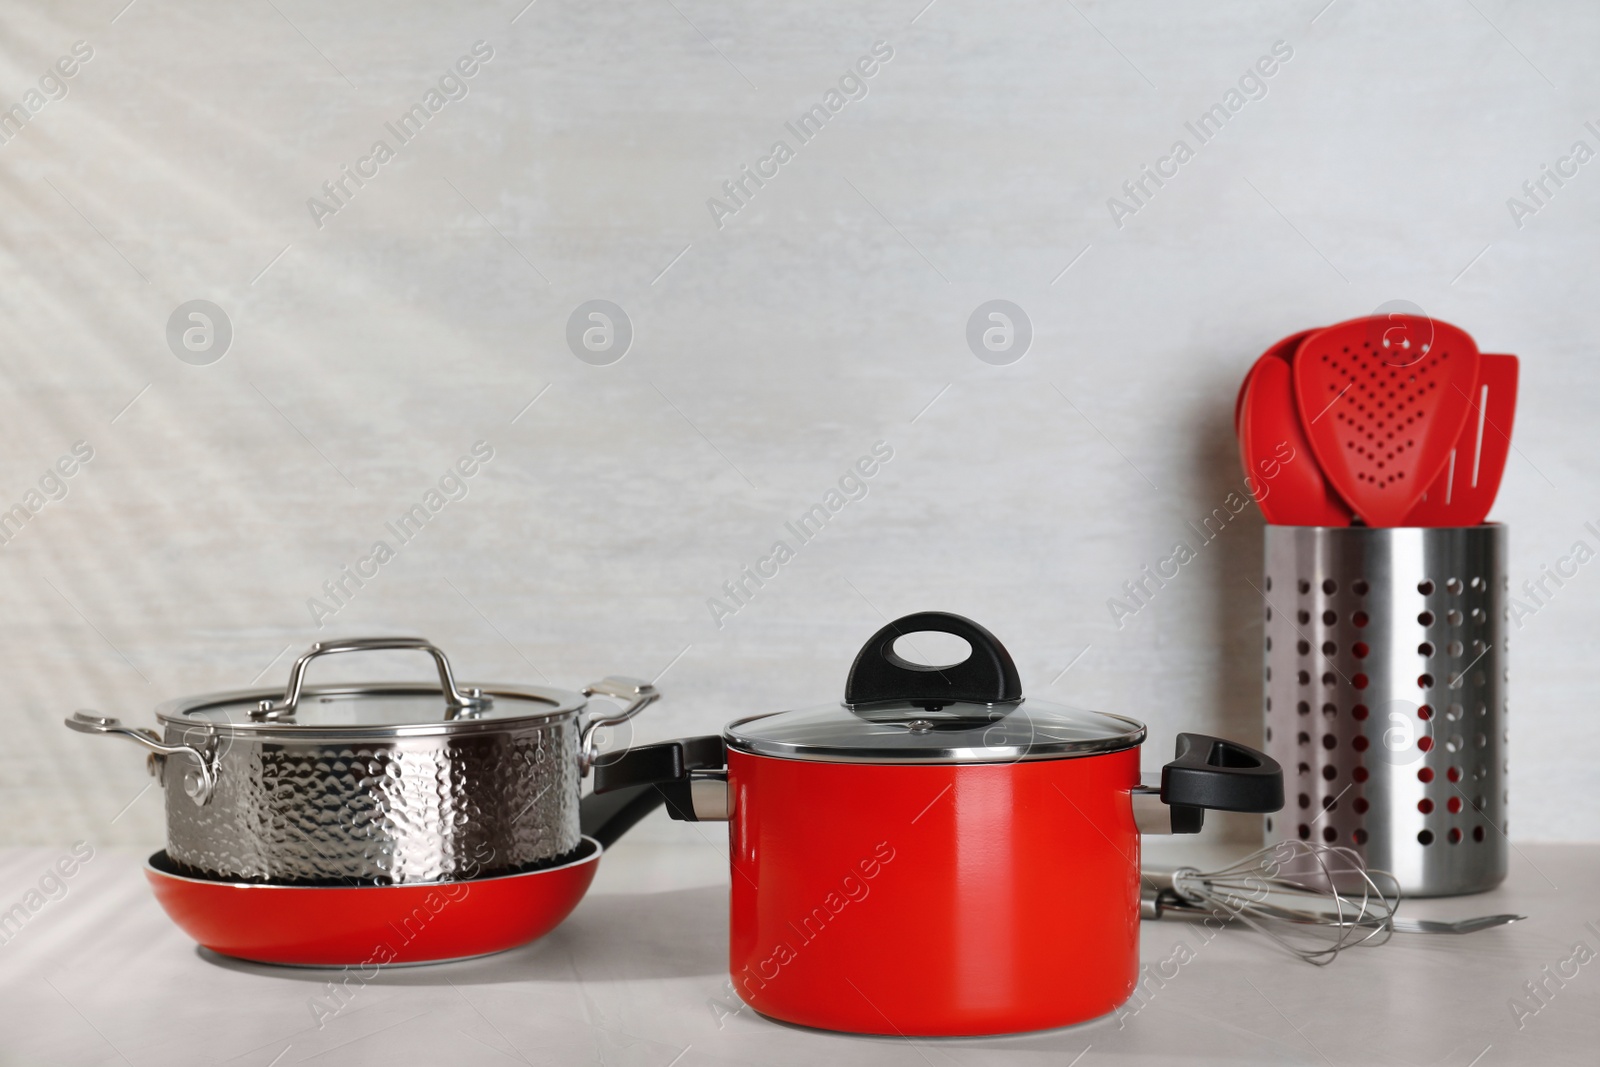 Photo of Set of clean cookware on table against light background